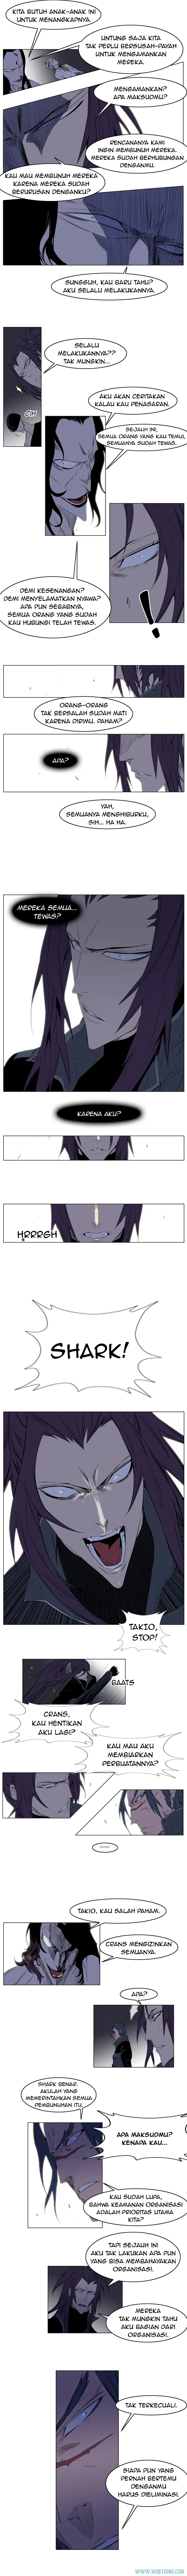 Noblesse Chapter 125 - 27